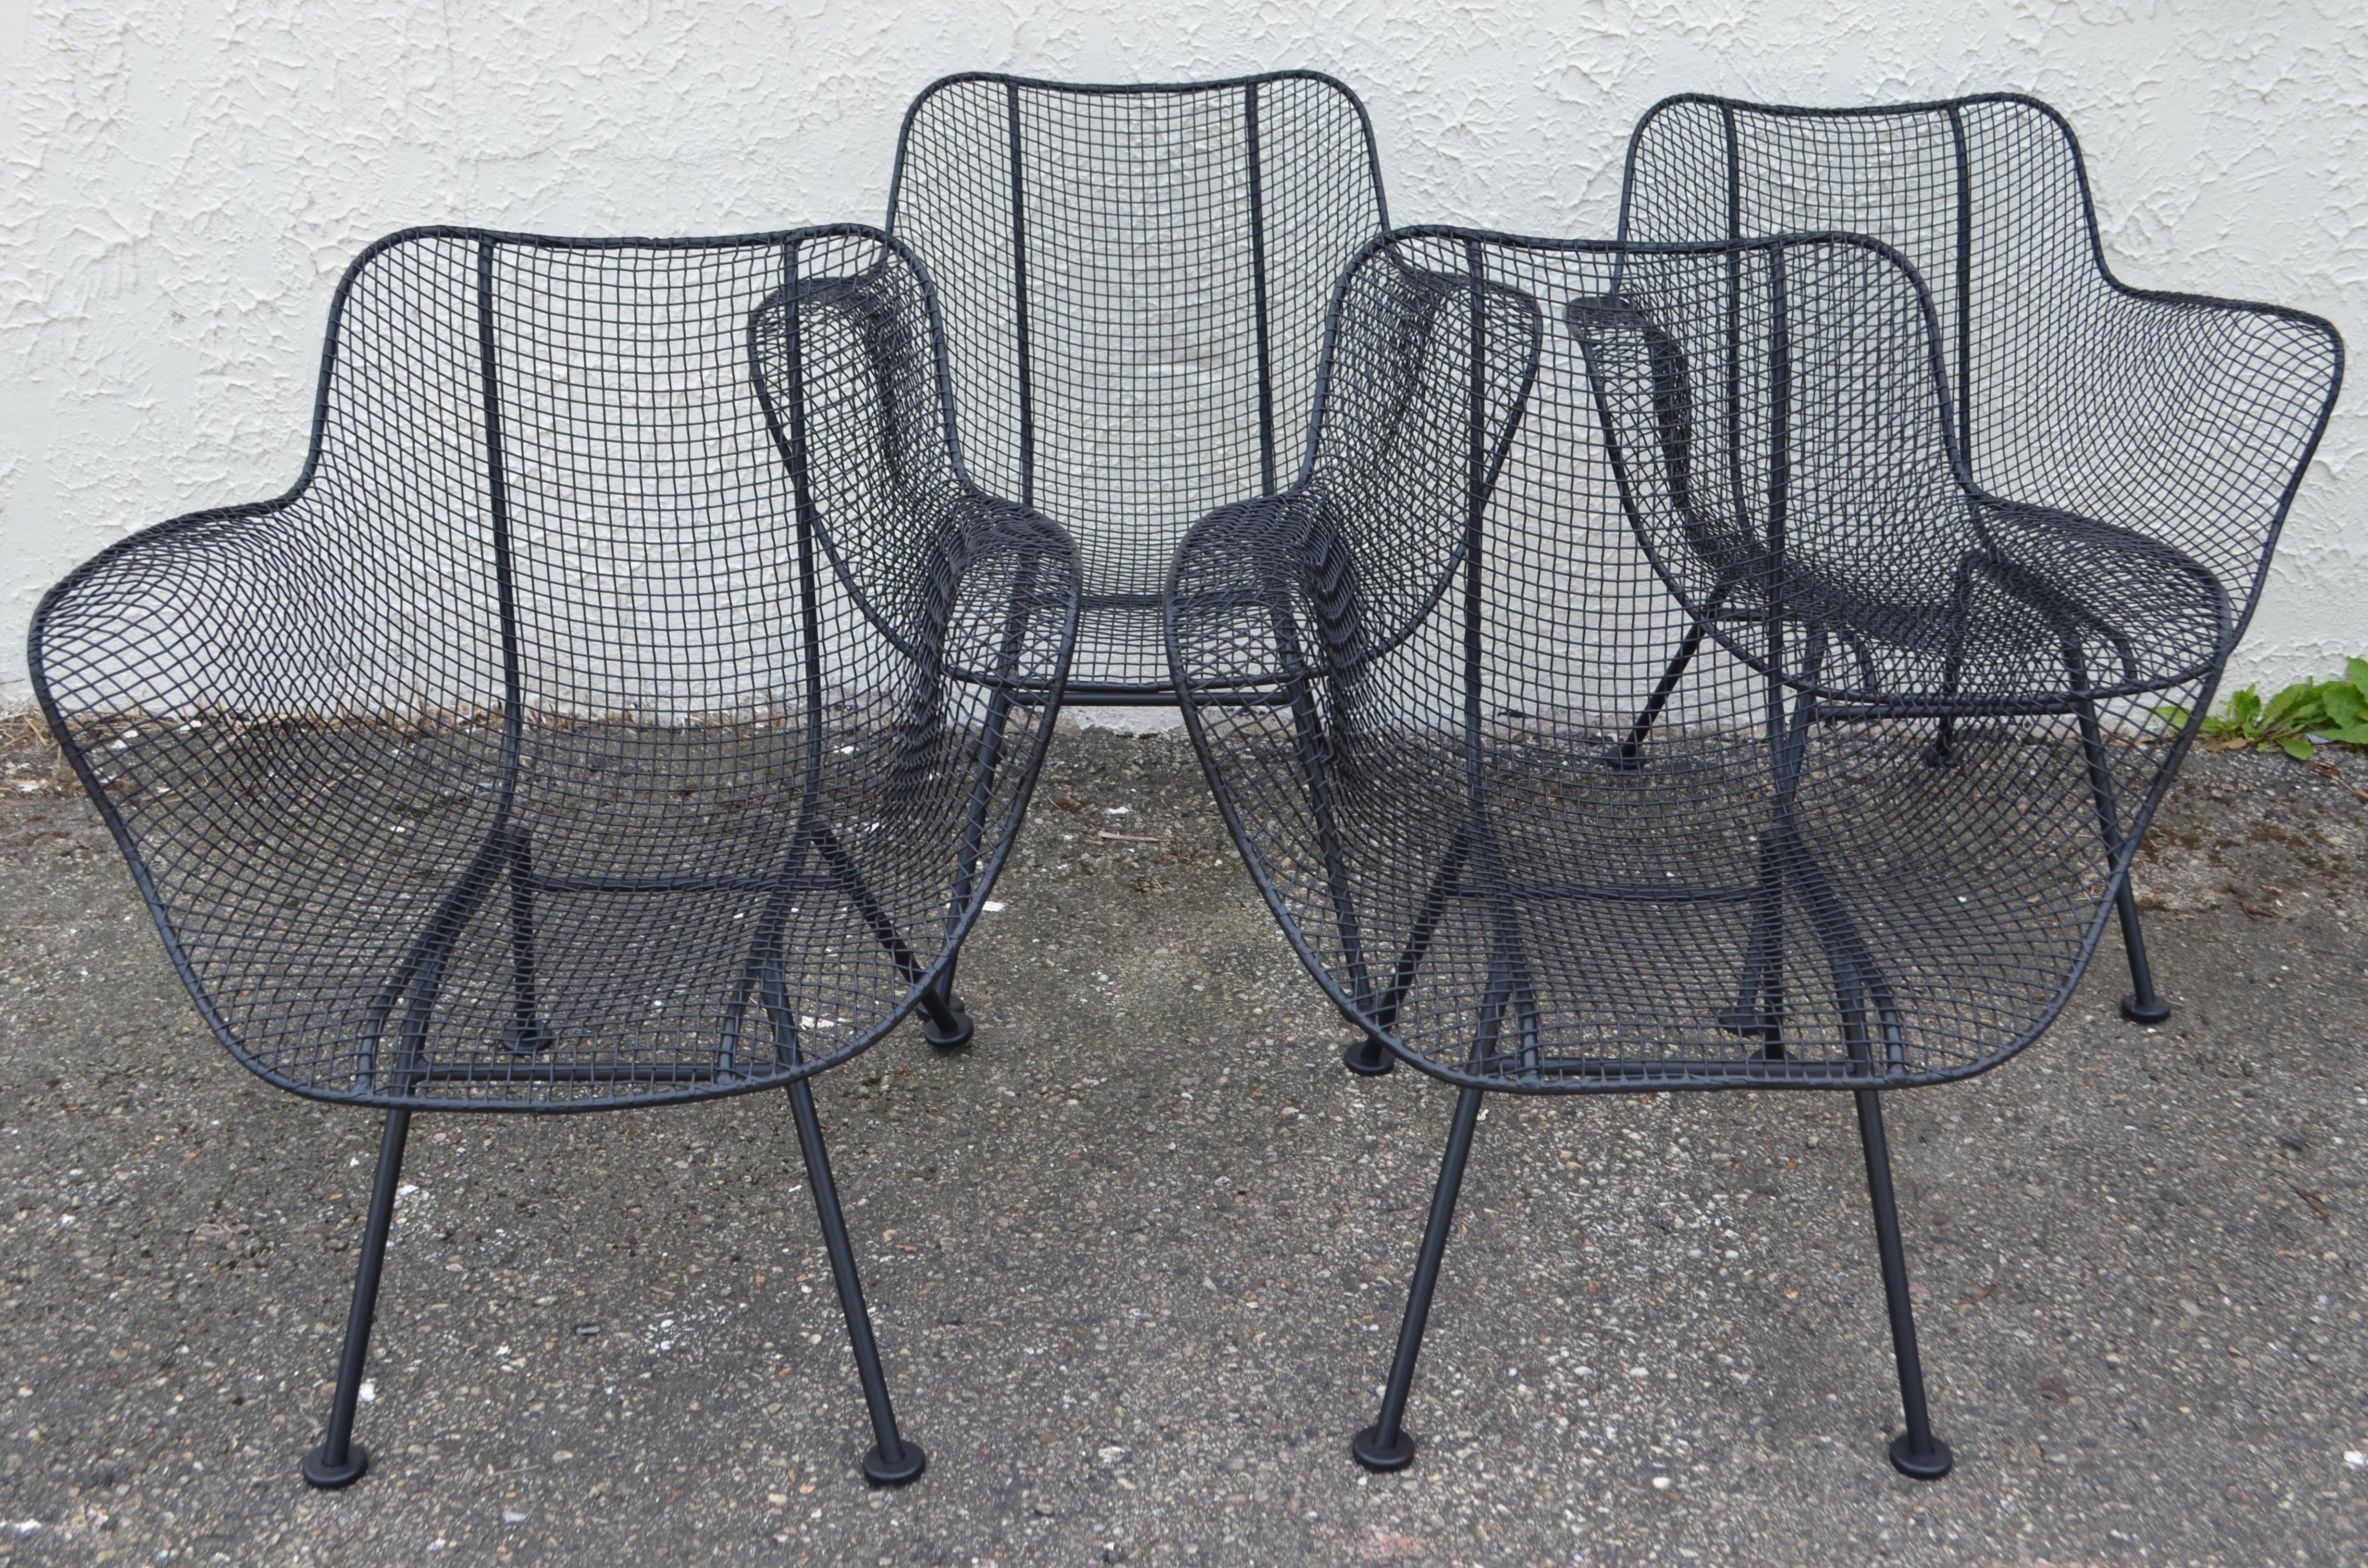 Designed by Russell Woodard in the 1950s, a set of 4 Classic sculptura patio chairs. Sculpted in a ergonomic form. Recently sanded and powder-coated to perfection in satin black. These chairs sit so comfortably and look so very cool stationed on a